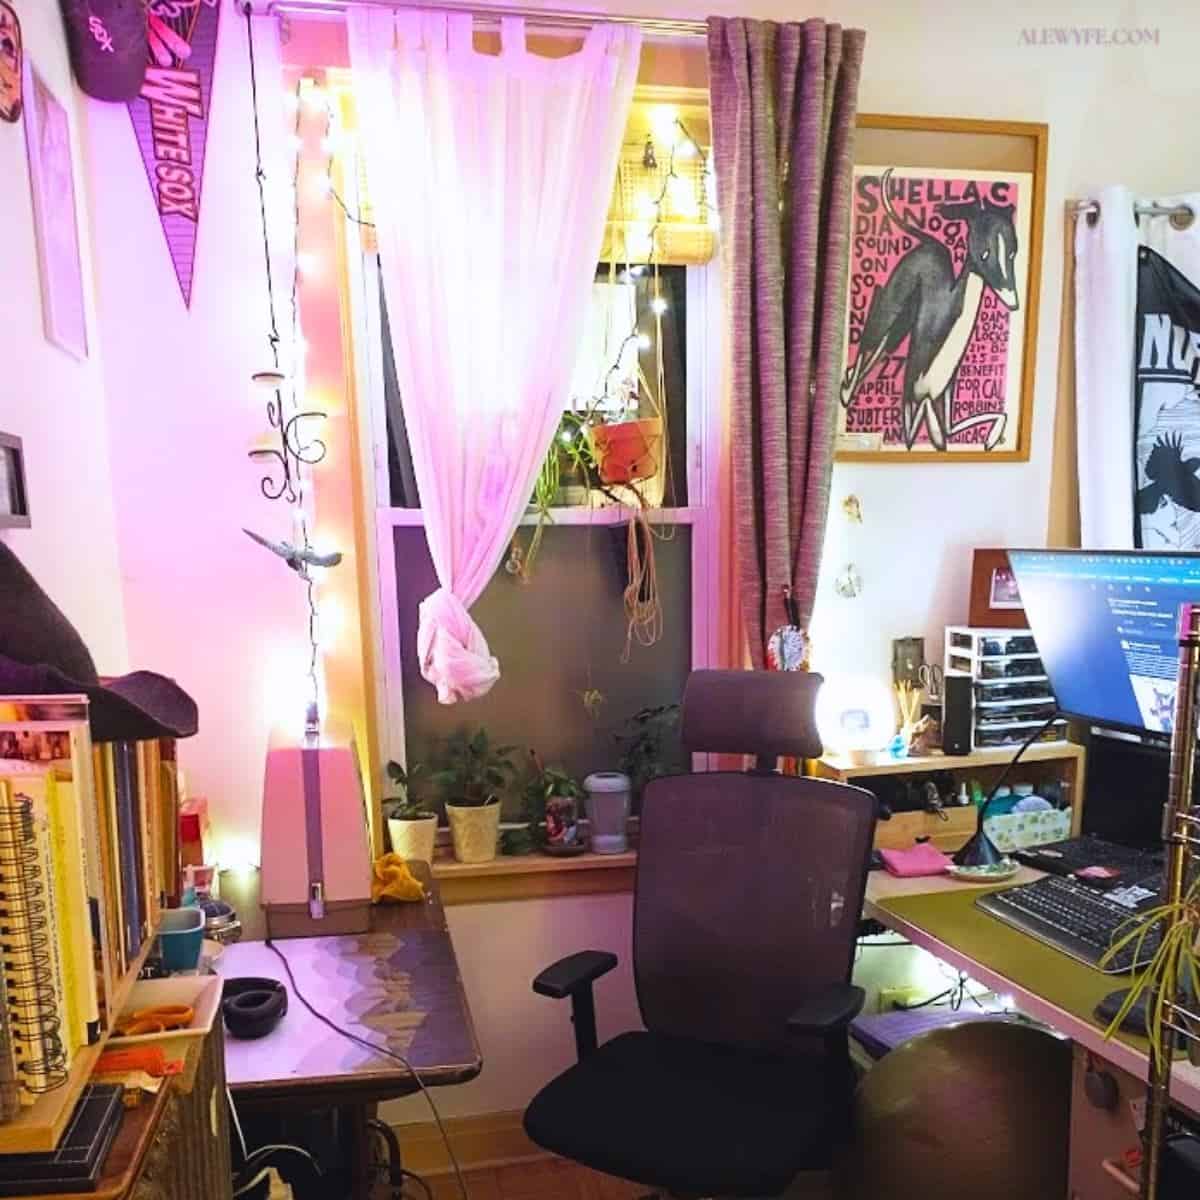 a brightly colored workspace with pink and white mood lighting at night. a computer desk is on the right and a sewing and craft table on the left, along with books on a shelf.